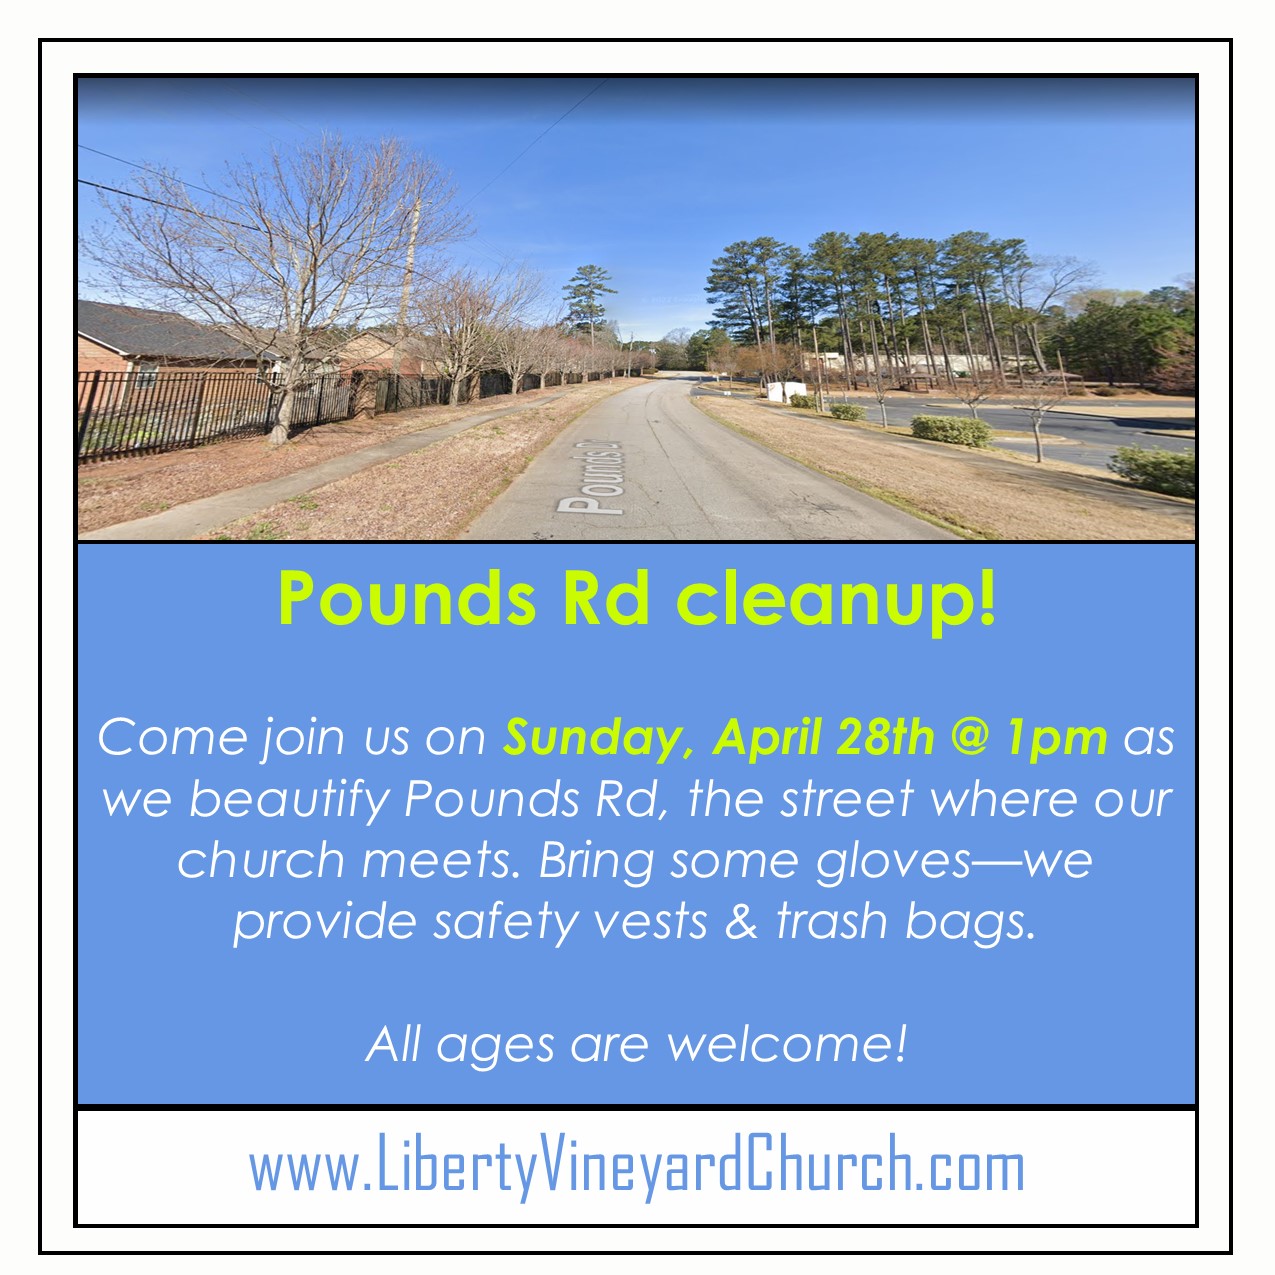 Pounds Rd cleanup (Sunday, Apr 28th @ 1:00pm)